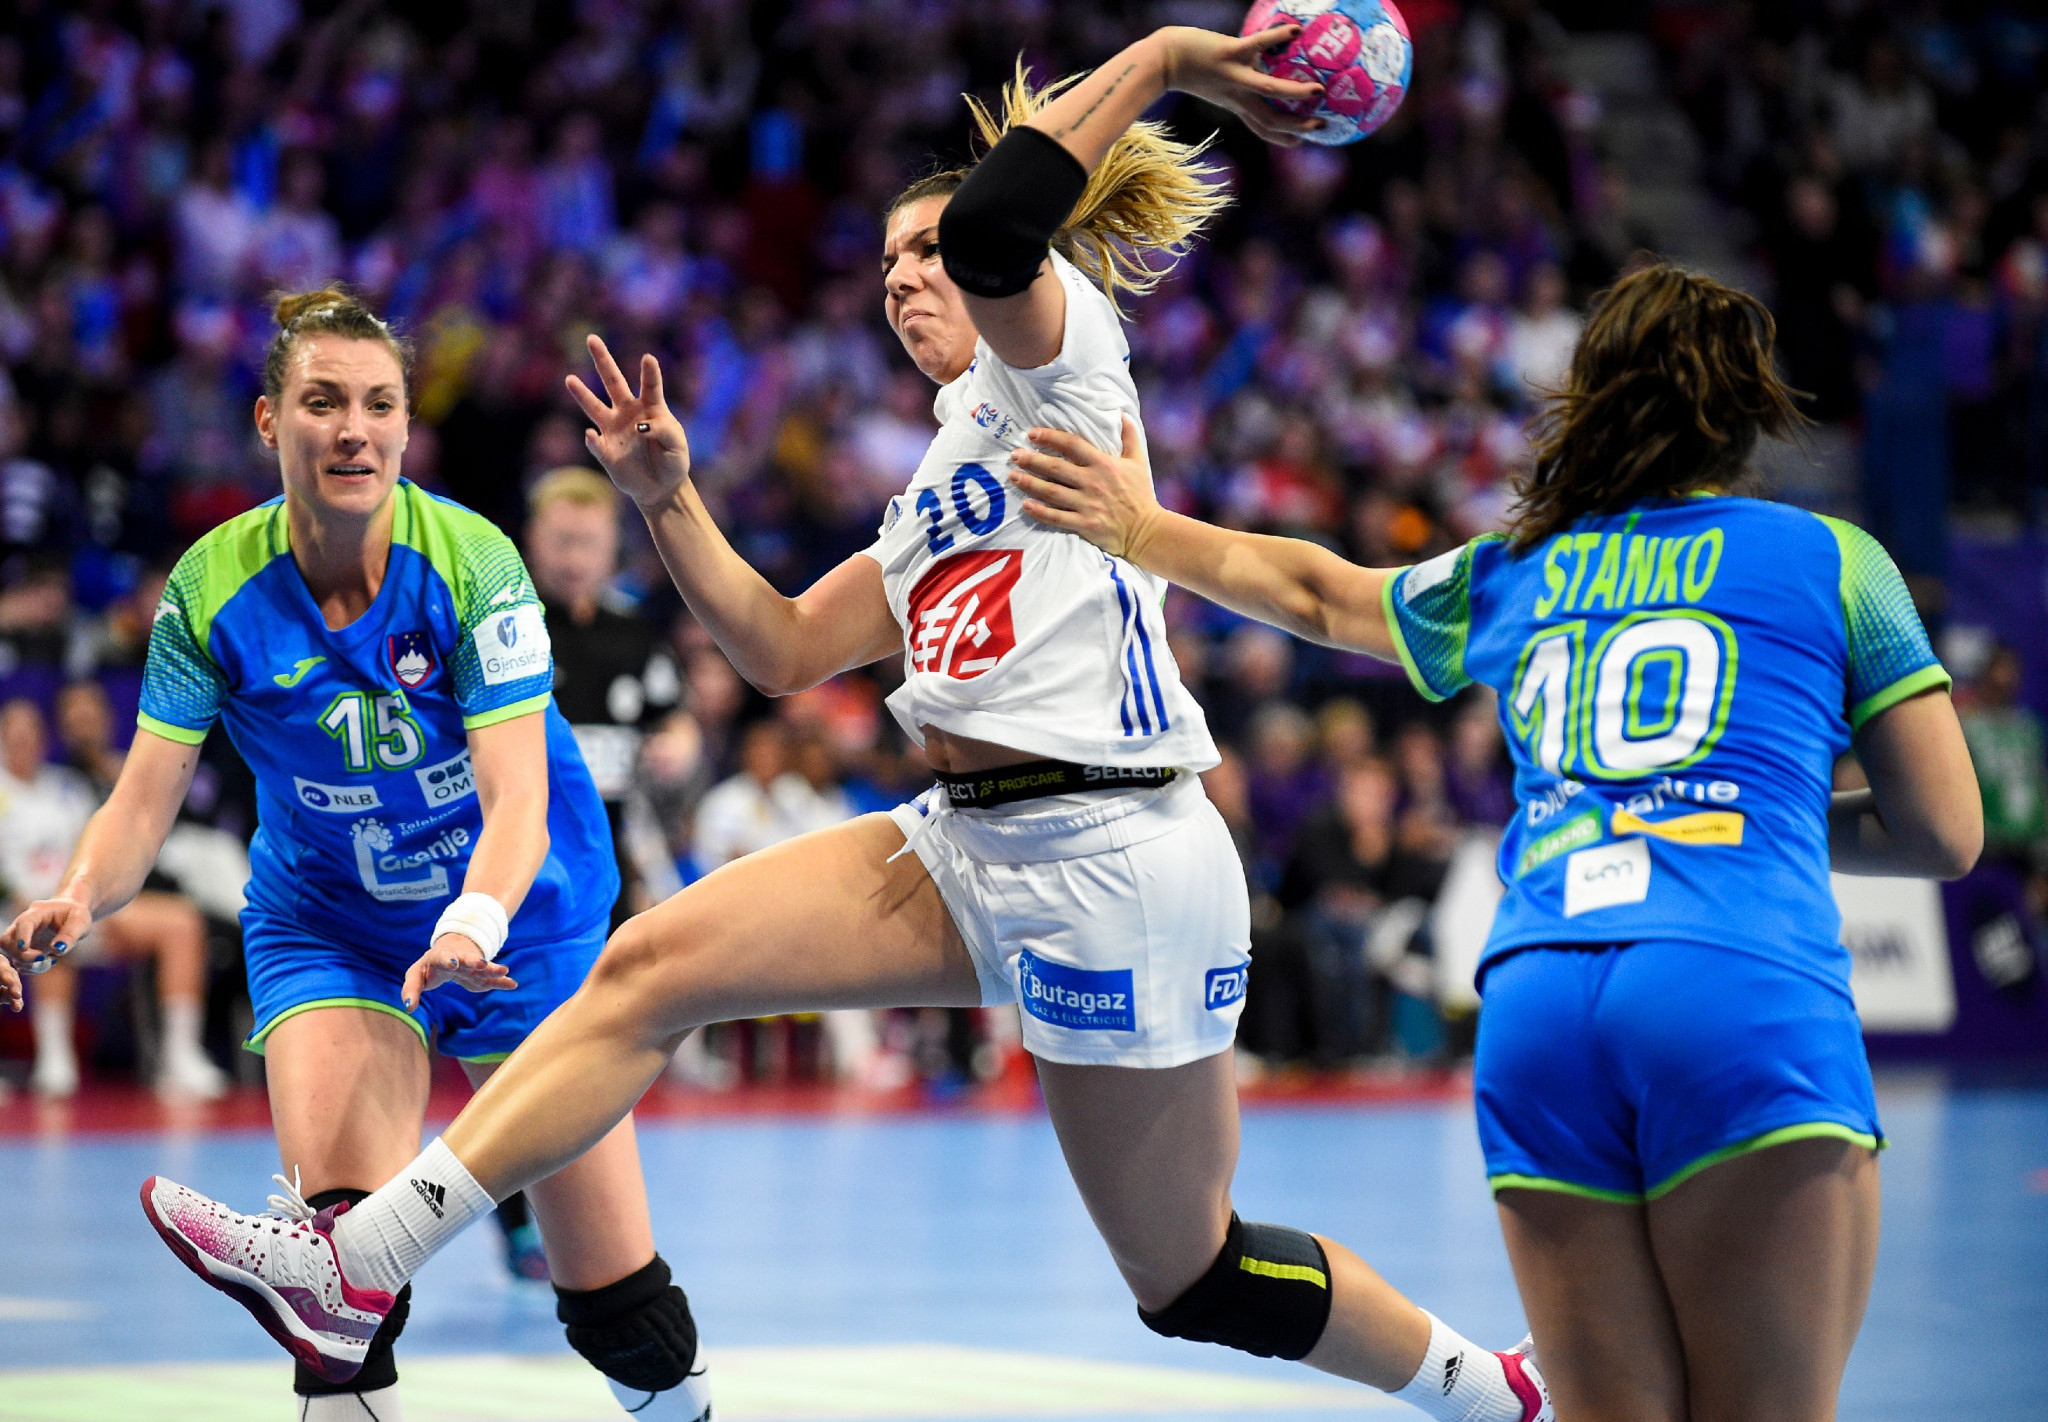 Hosts France beat Slovenia to get their first victory of the European Women's Handball Championships ©Getty Images